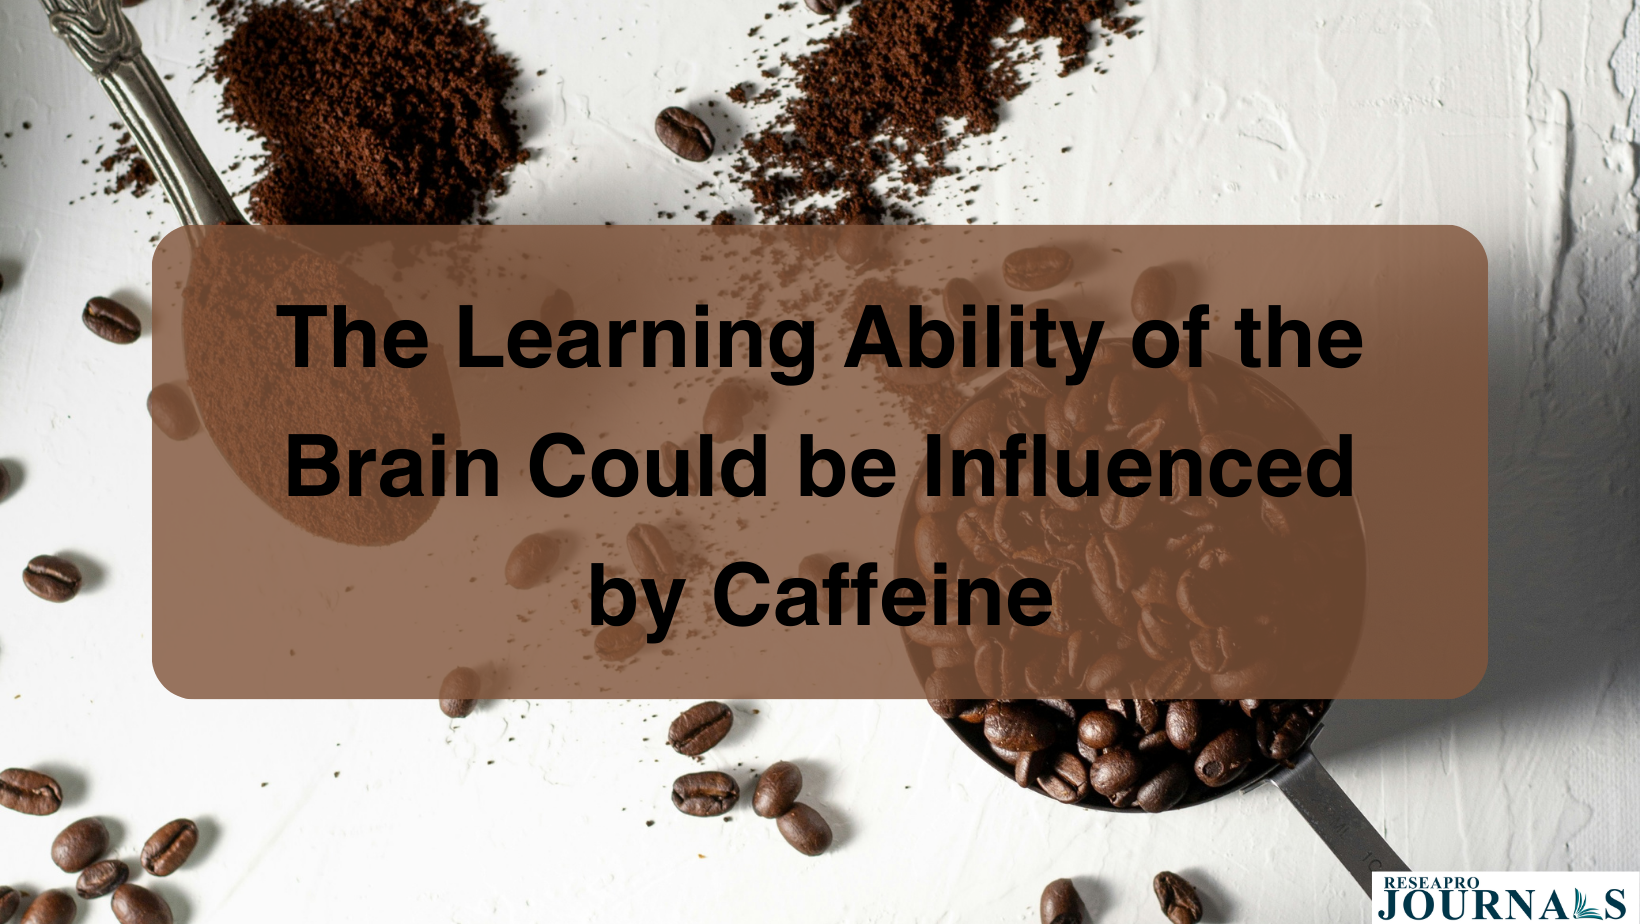 The Learning ability of the Brain Could be Influenced by Caffeine